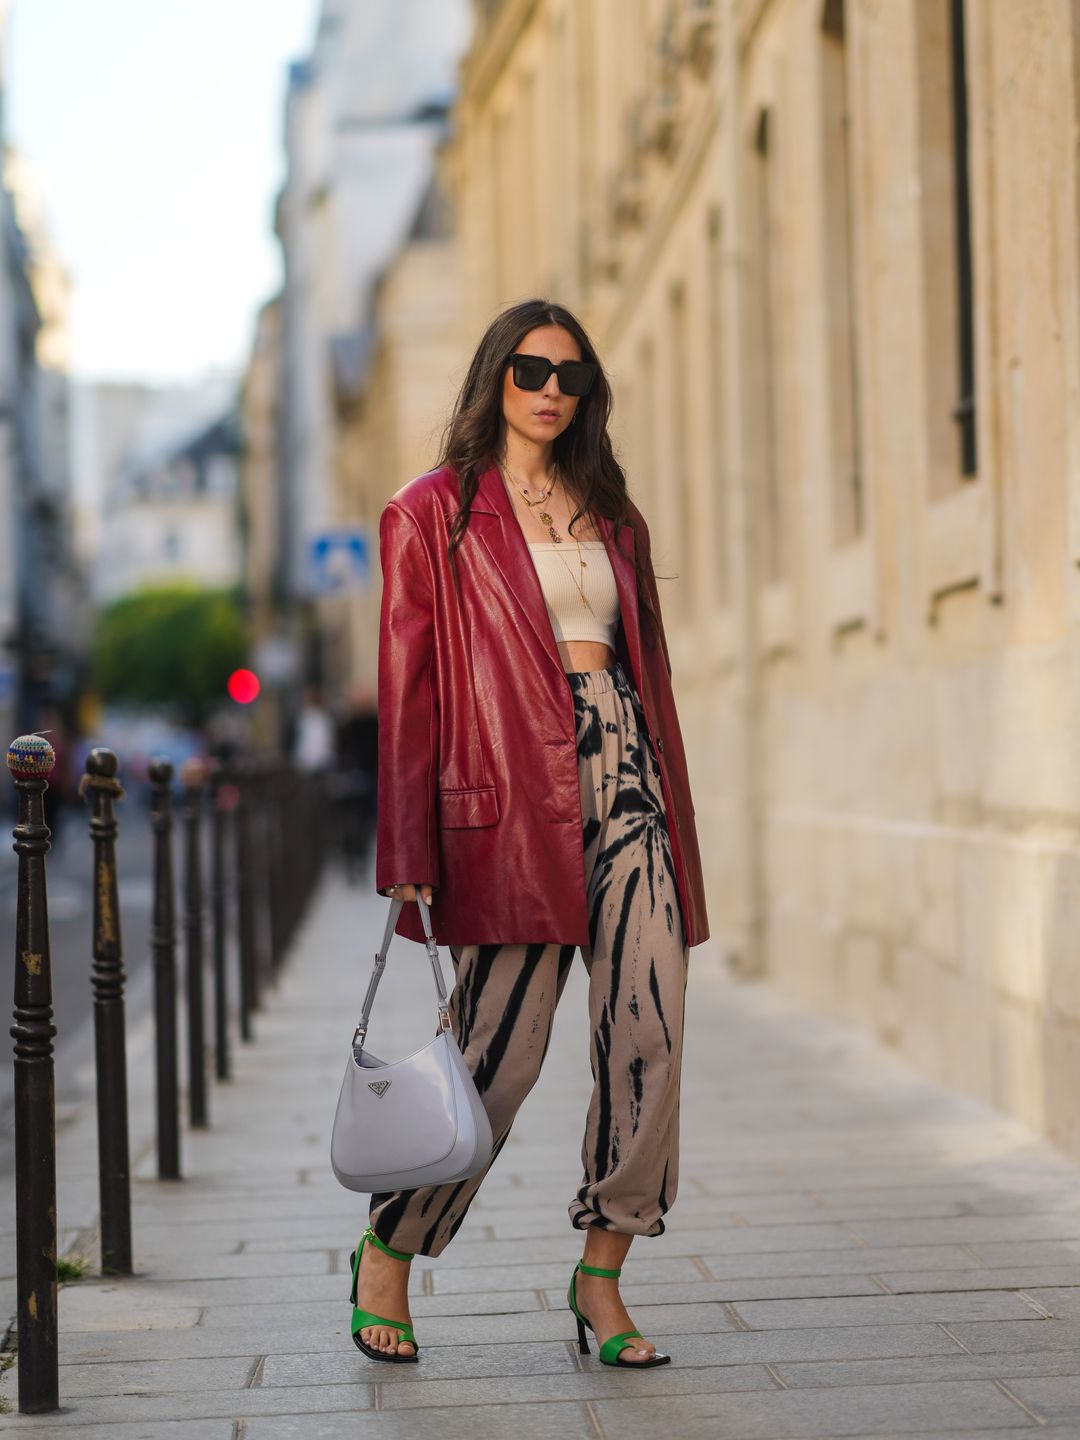 Gabriella Berdugo pairs and oversized leather blazer with sweatpants for a chic summer aesthetic